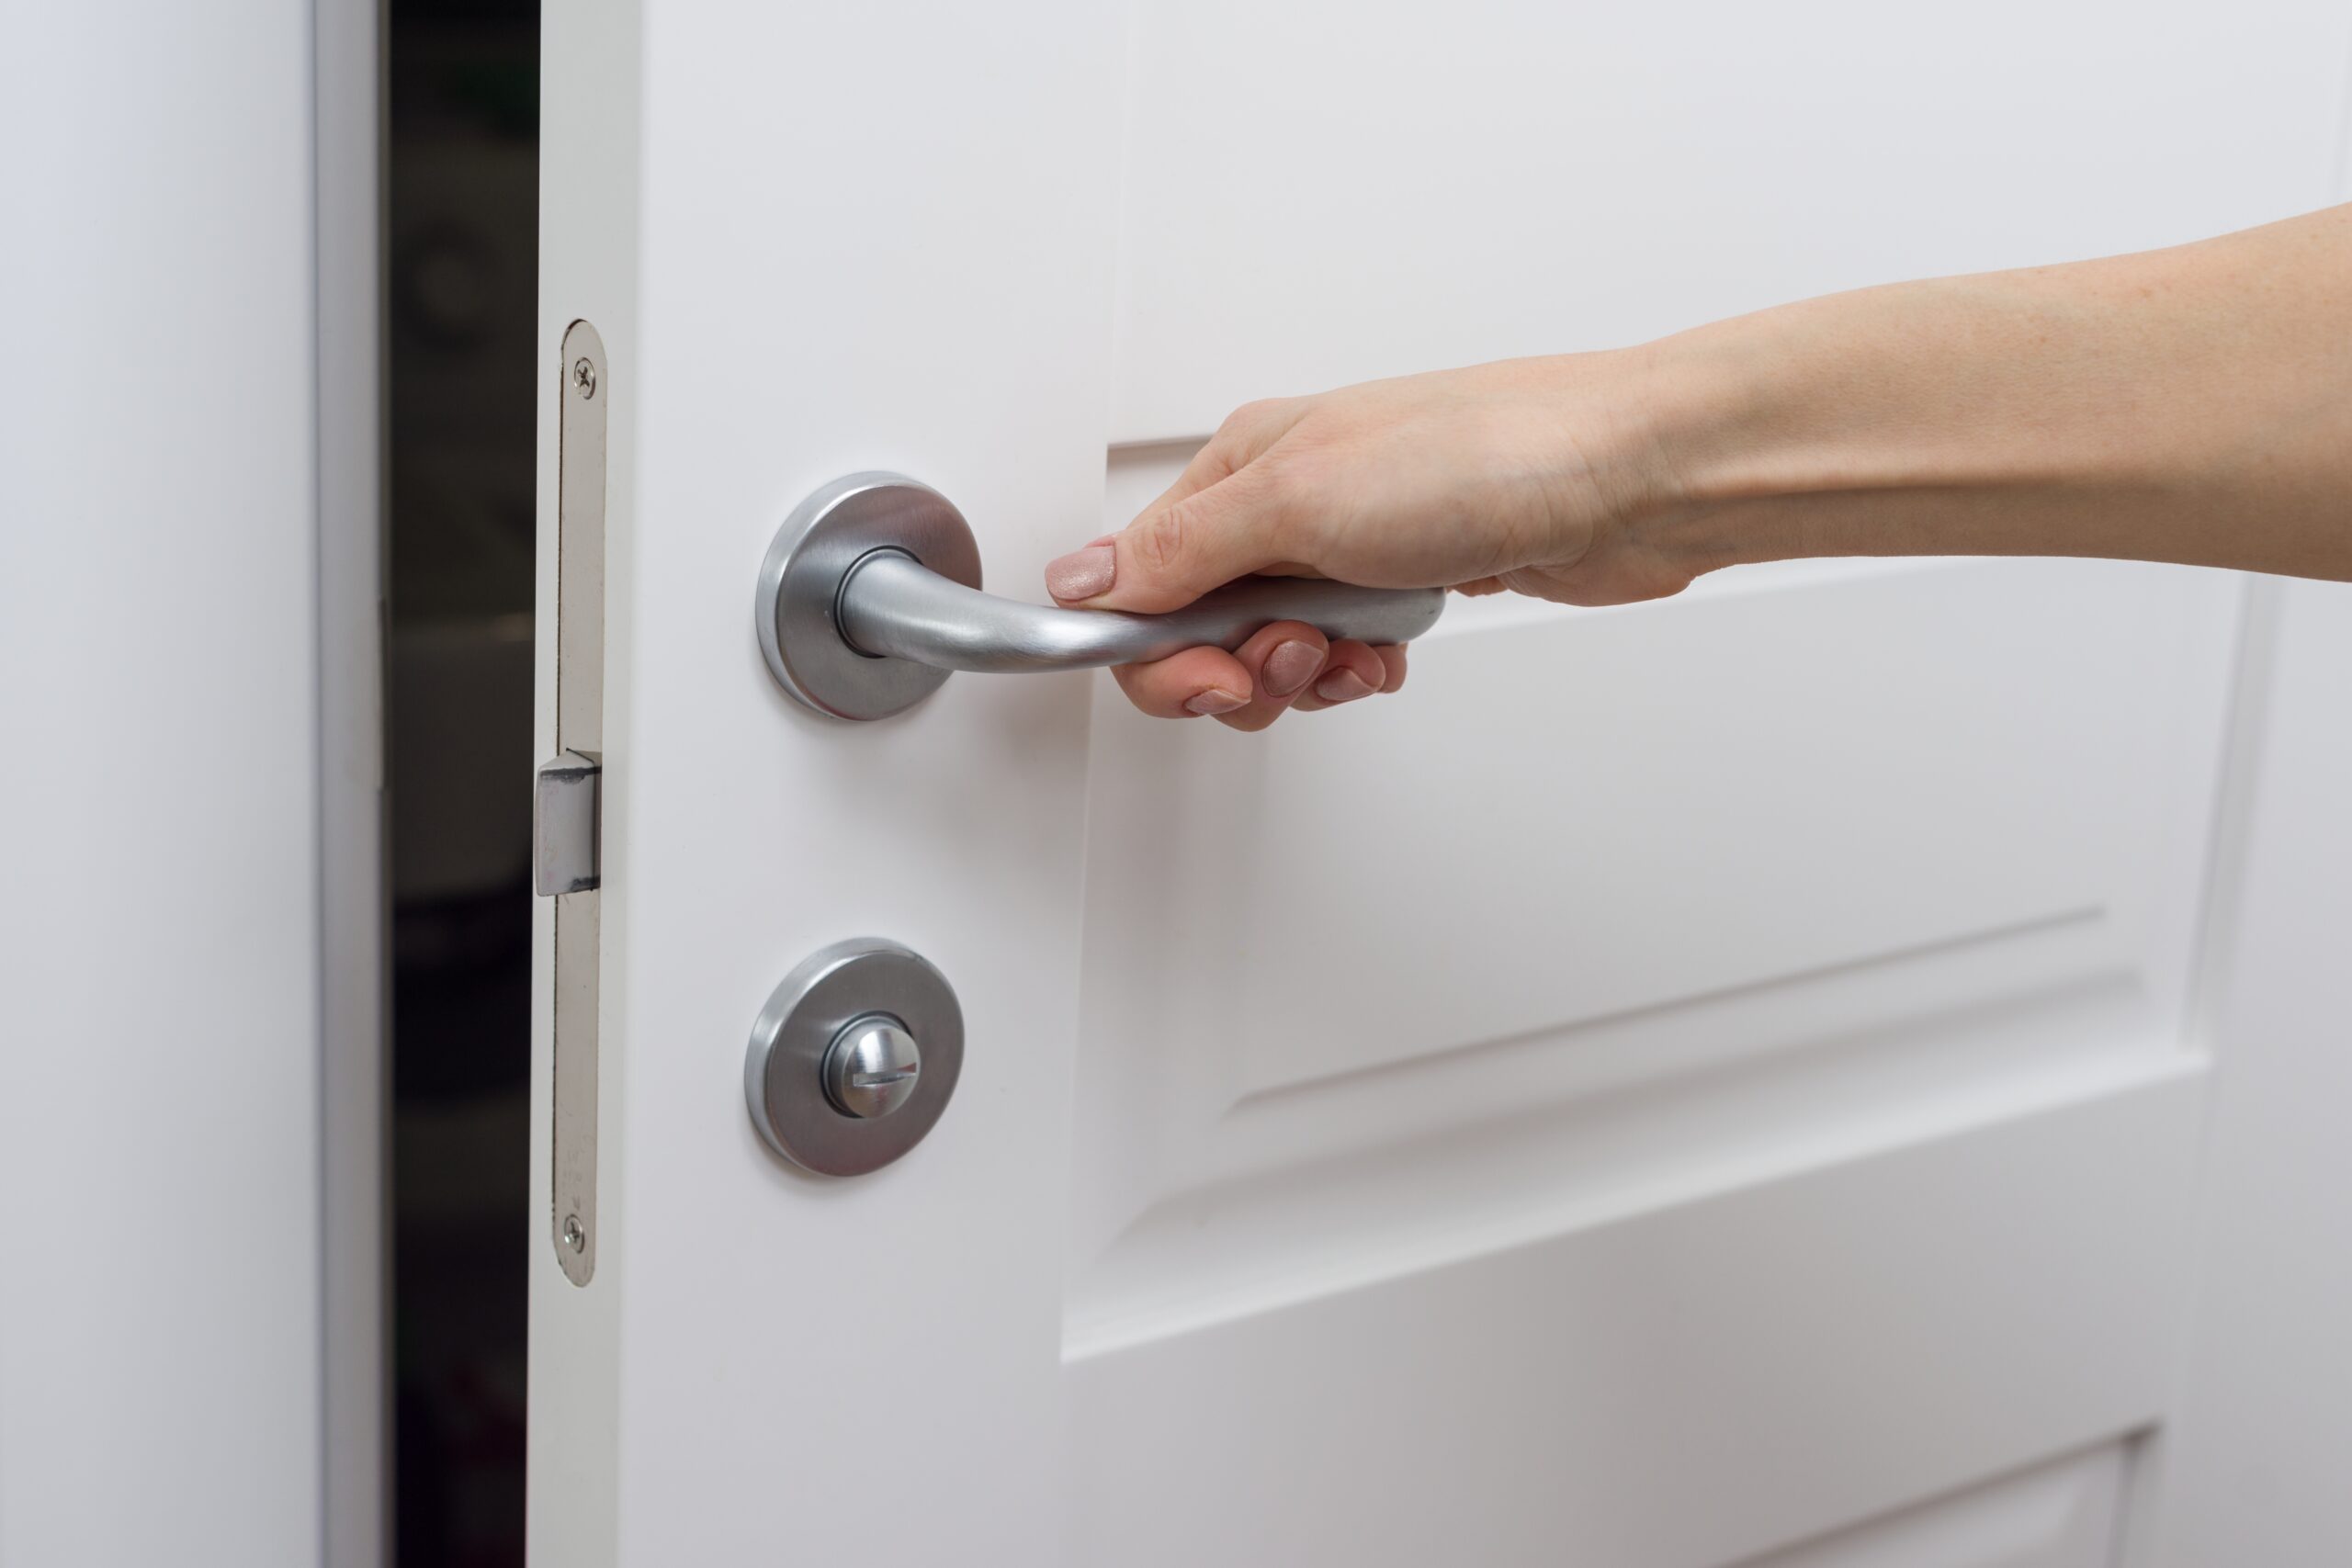 The hand opens the door slightly. Detail of a white interior door with a chrome door handle and latch